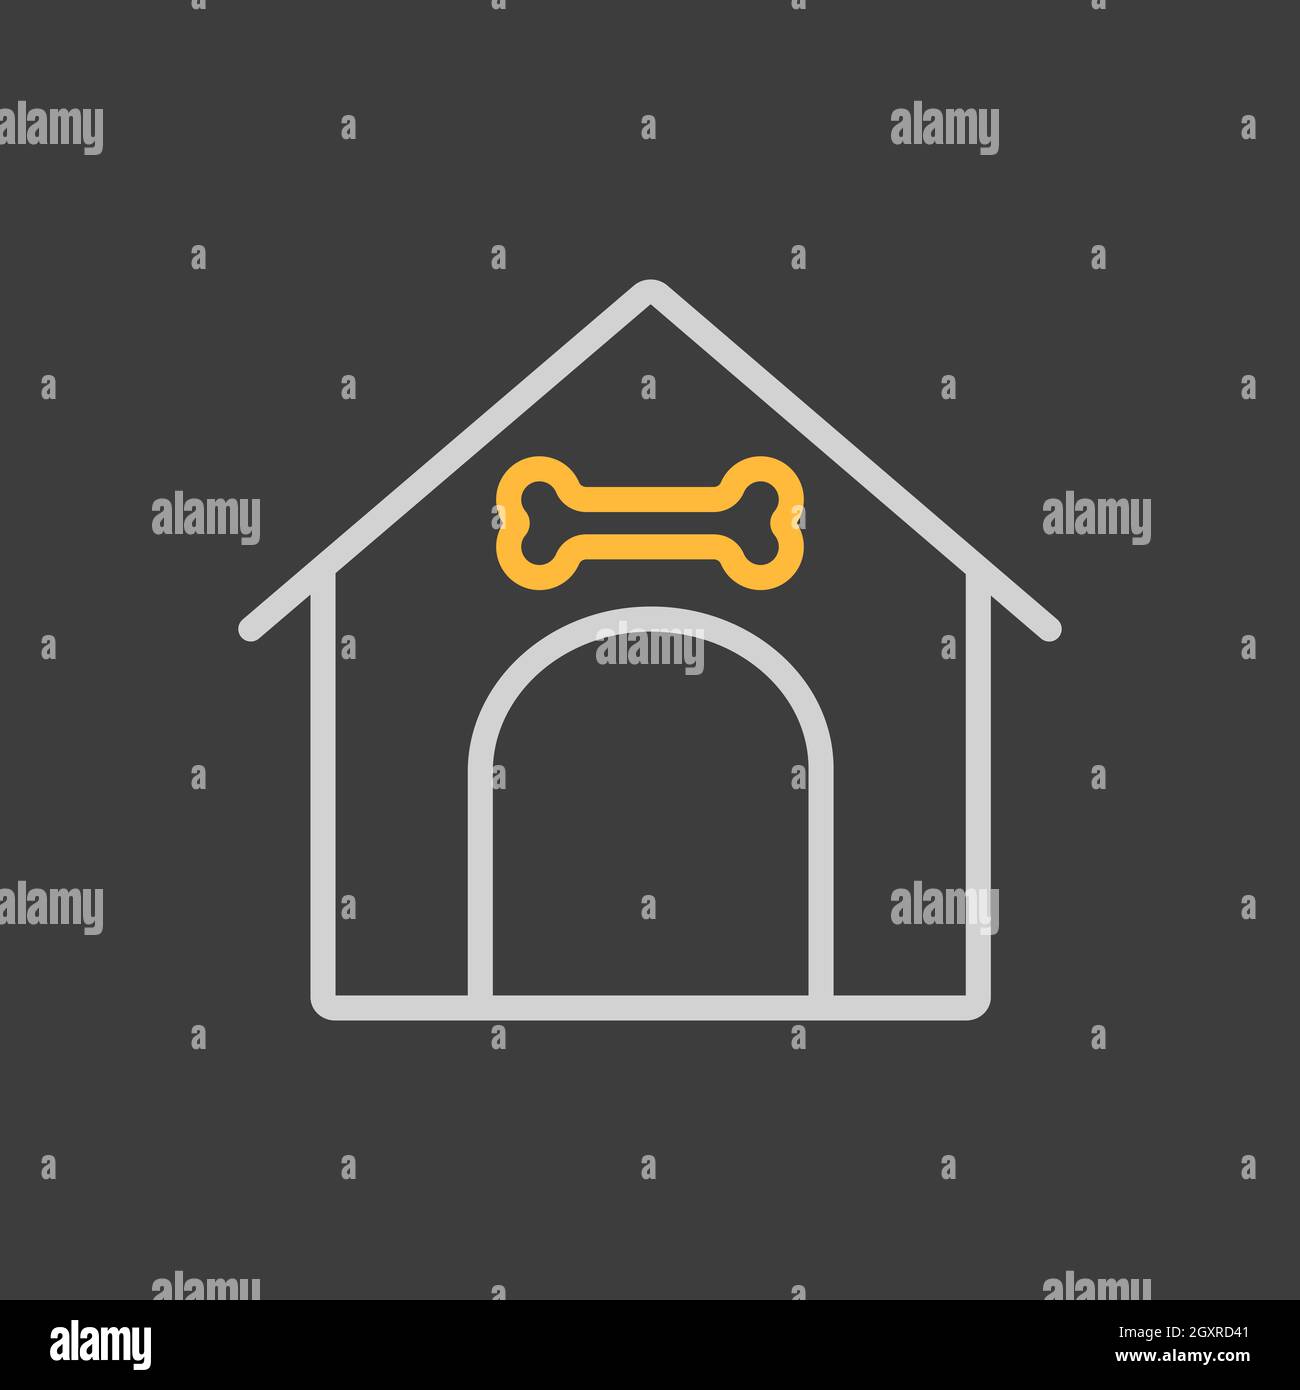 Dog house vector icon on dark background. Pet animal sign. Graph symbol for pet and veterinary web site and apps design, logo, app, UI Stock Photo